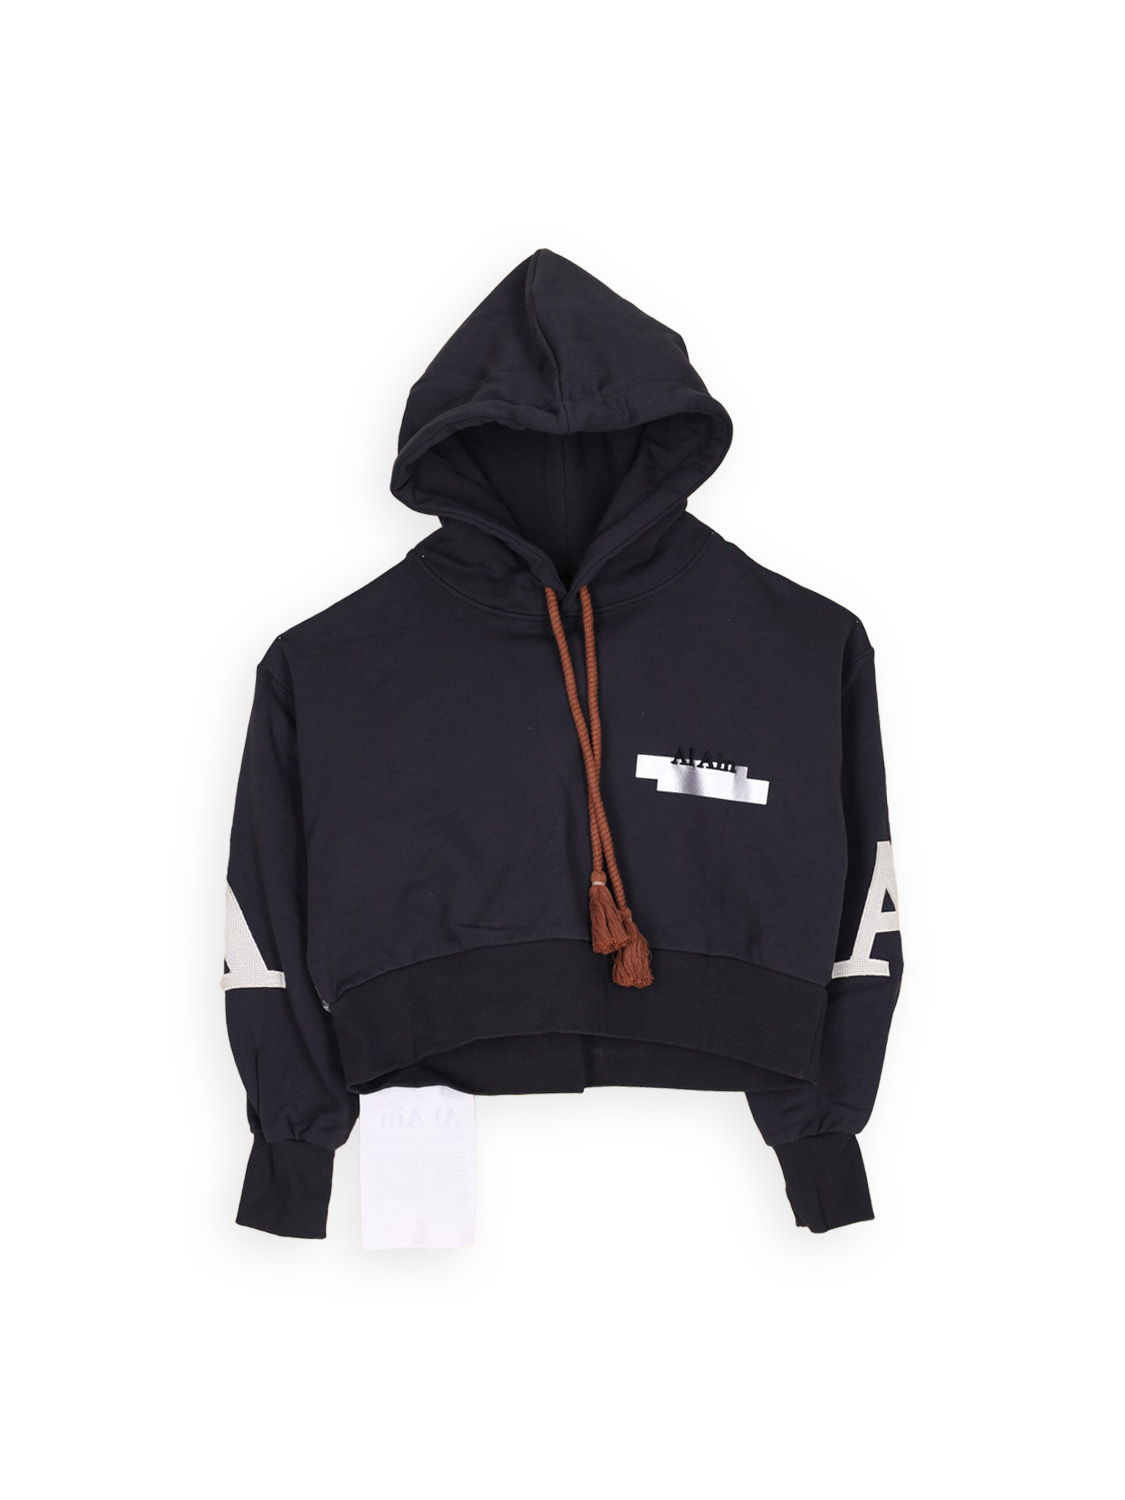 Ahox – Cropped Hoodie with pattern 